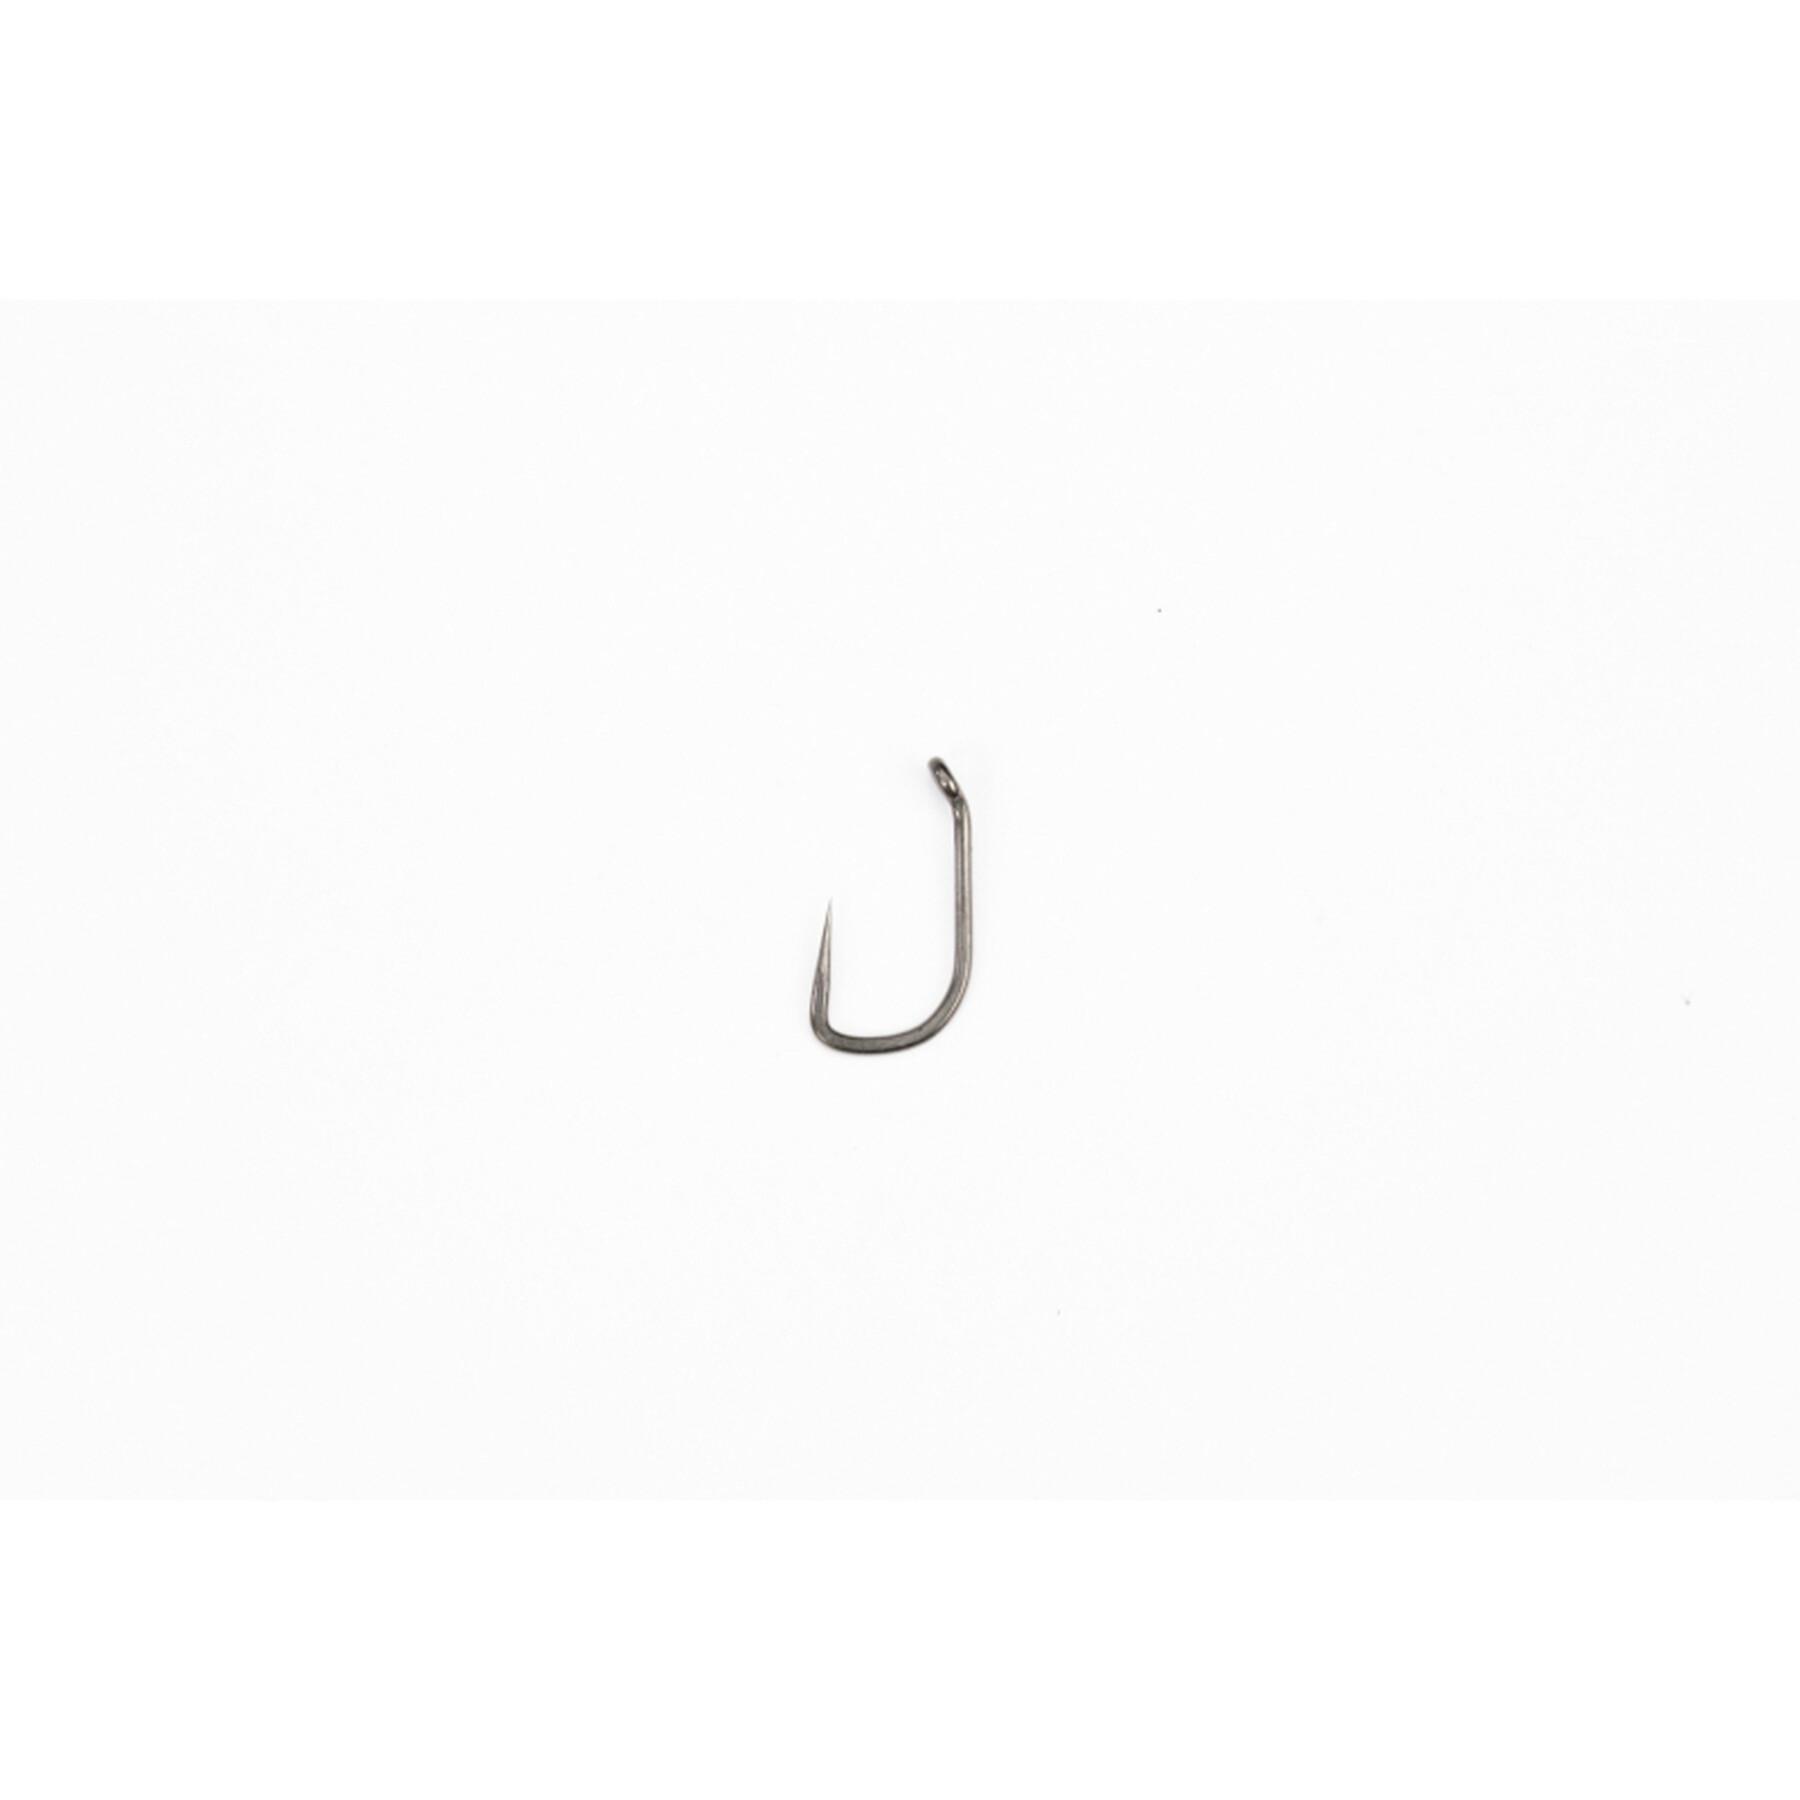 Hook Pinpoint Twister size 6 Micro Barbed